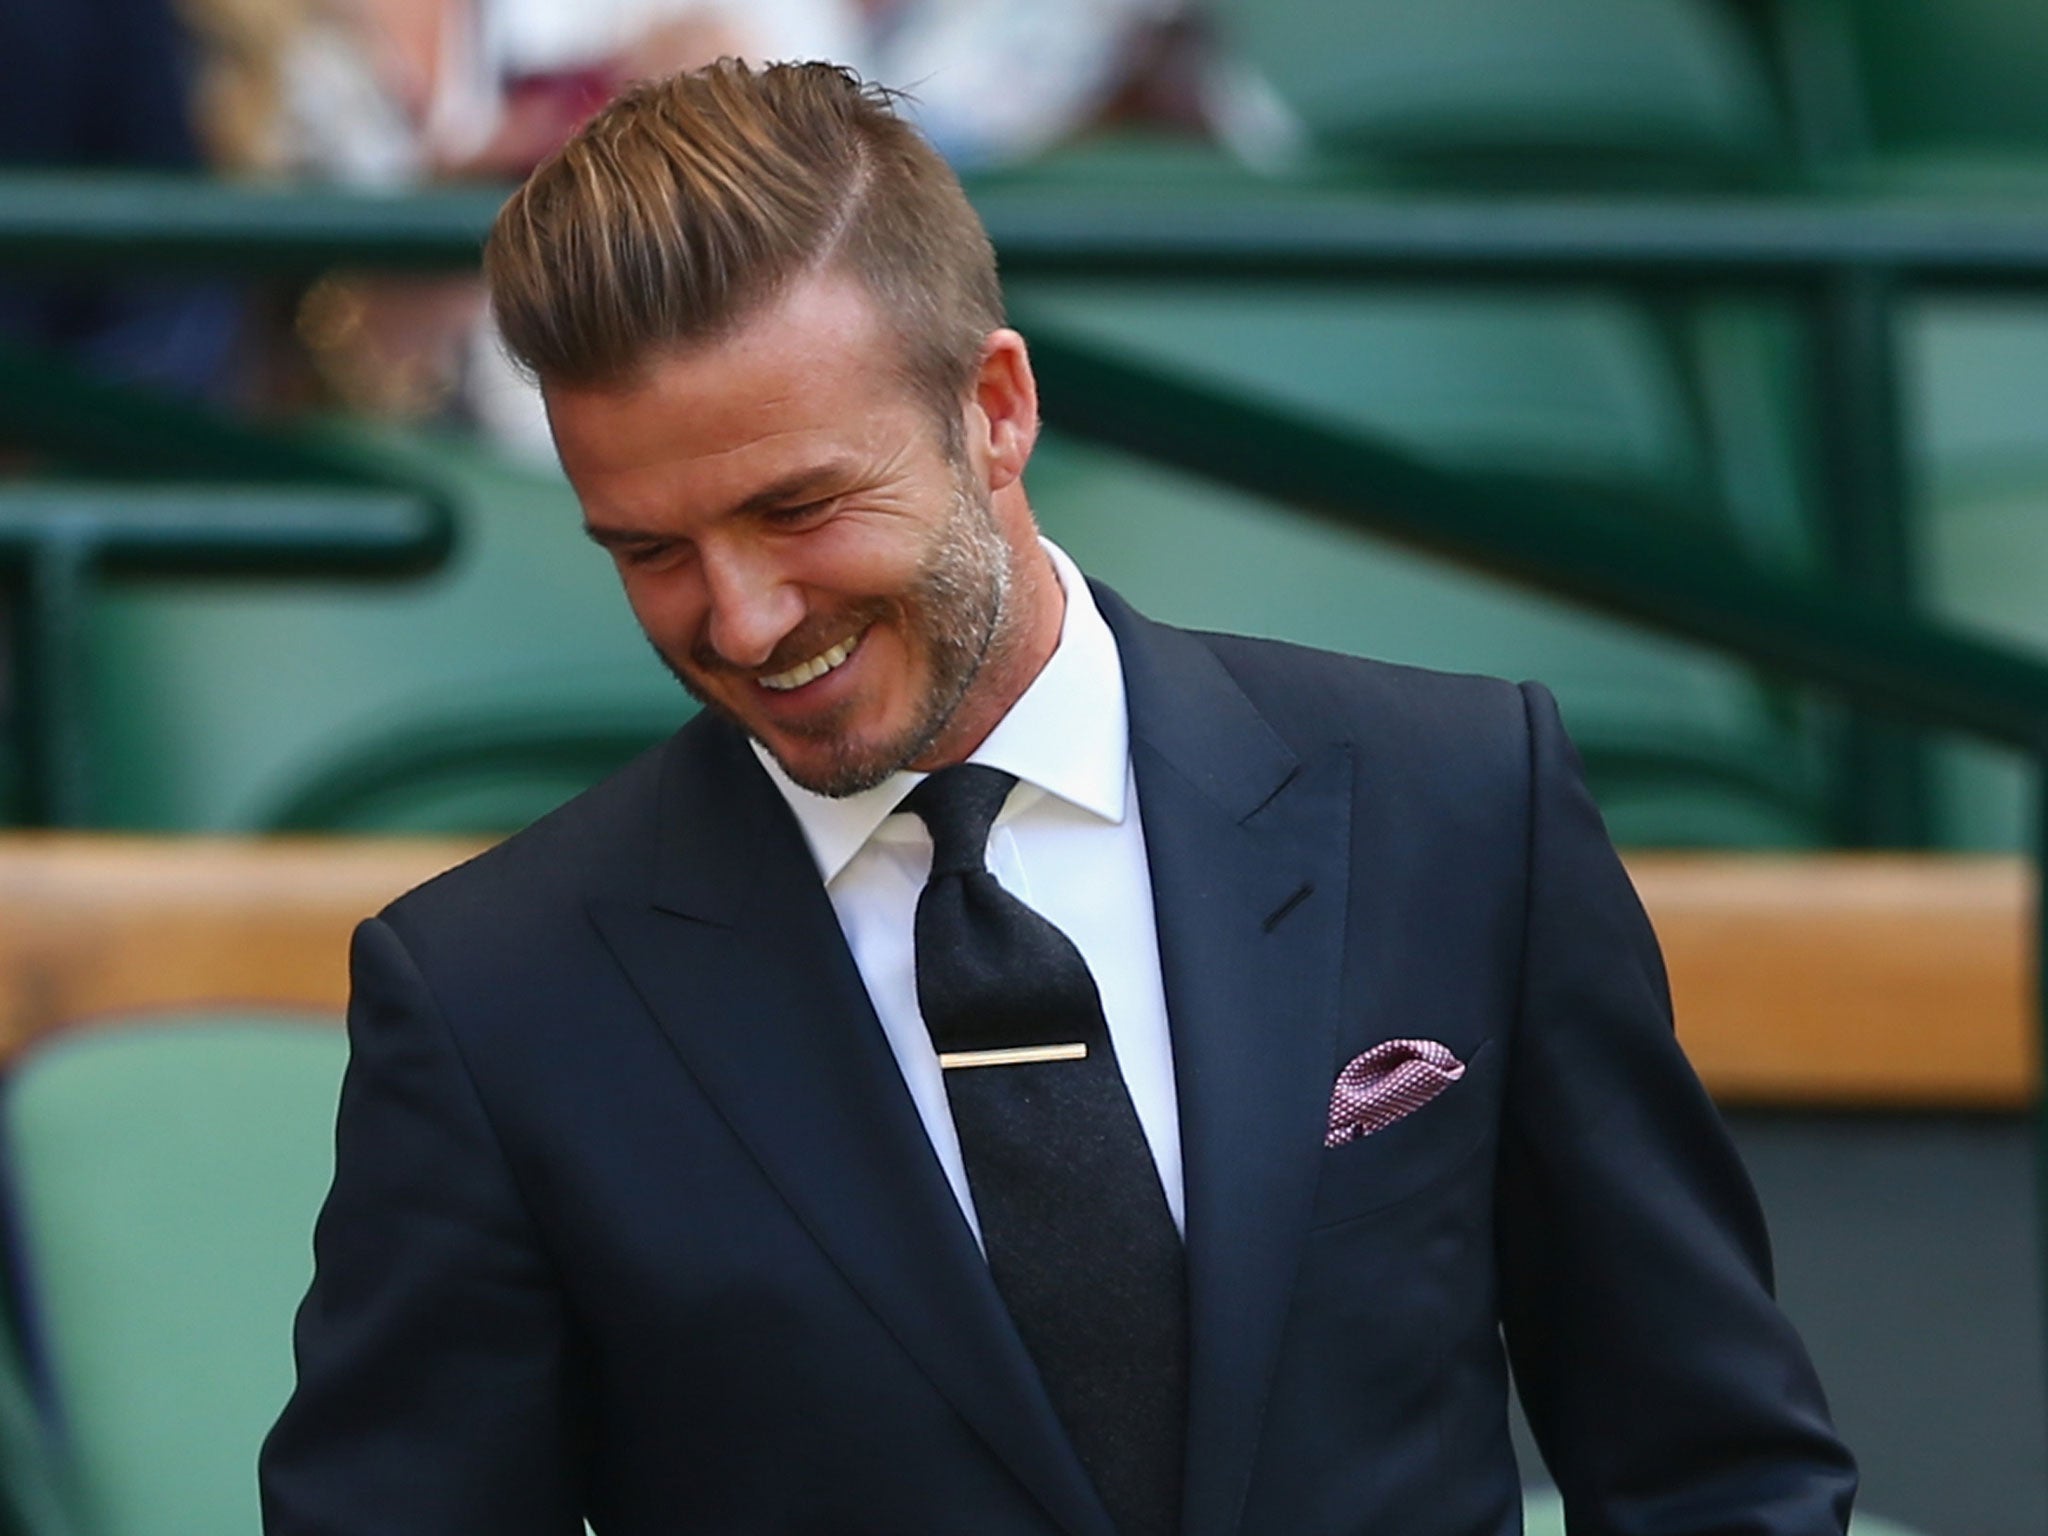 David Beckham couldn't help but smile after catching a ball during a game